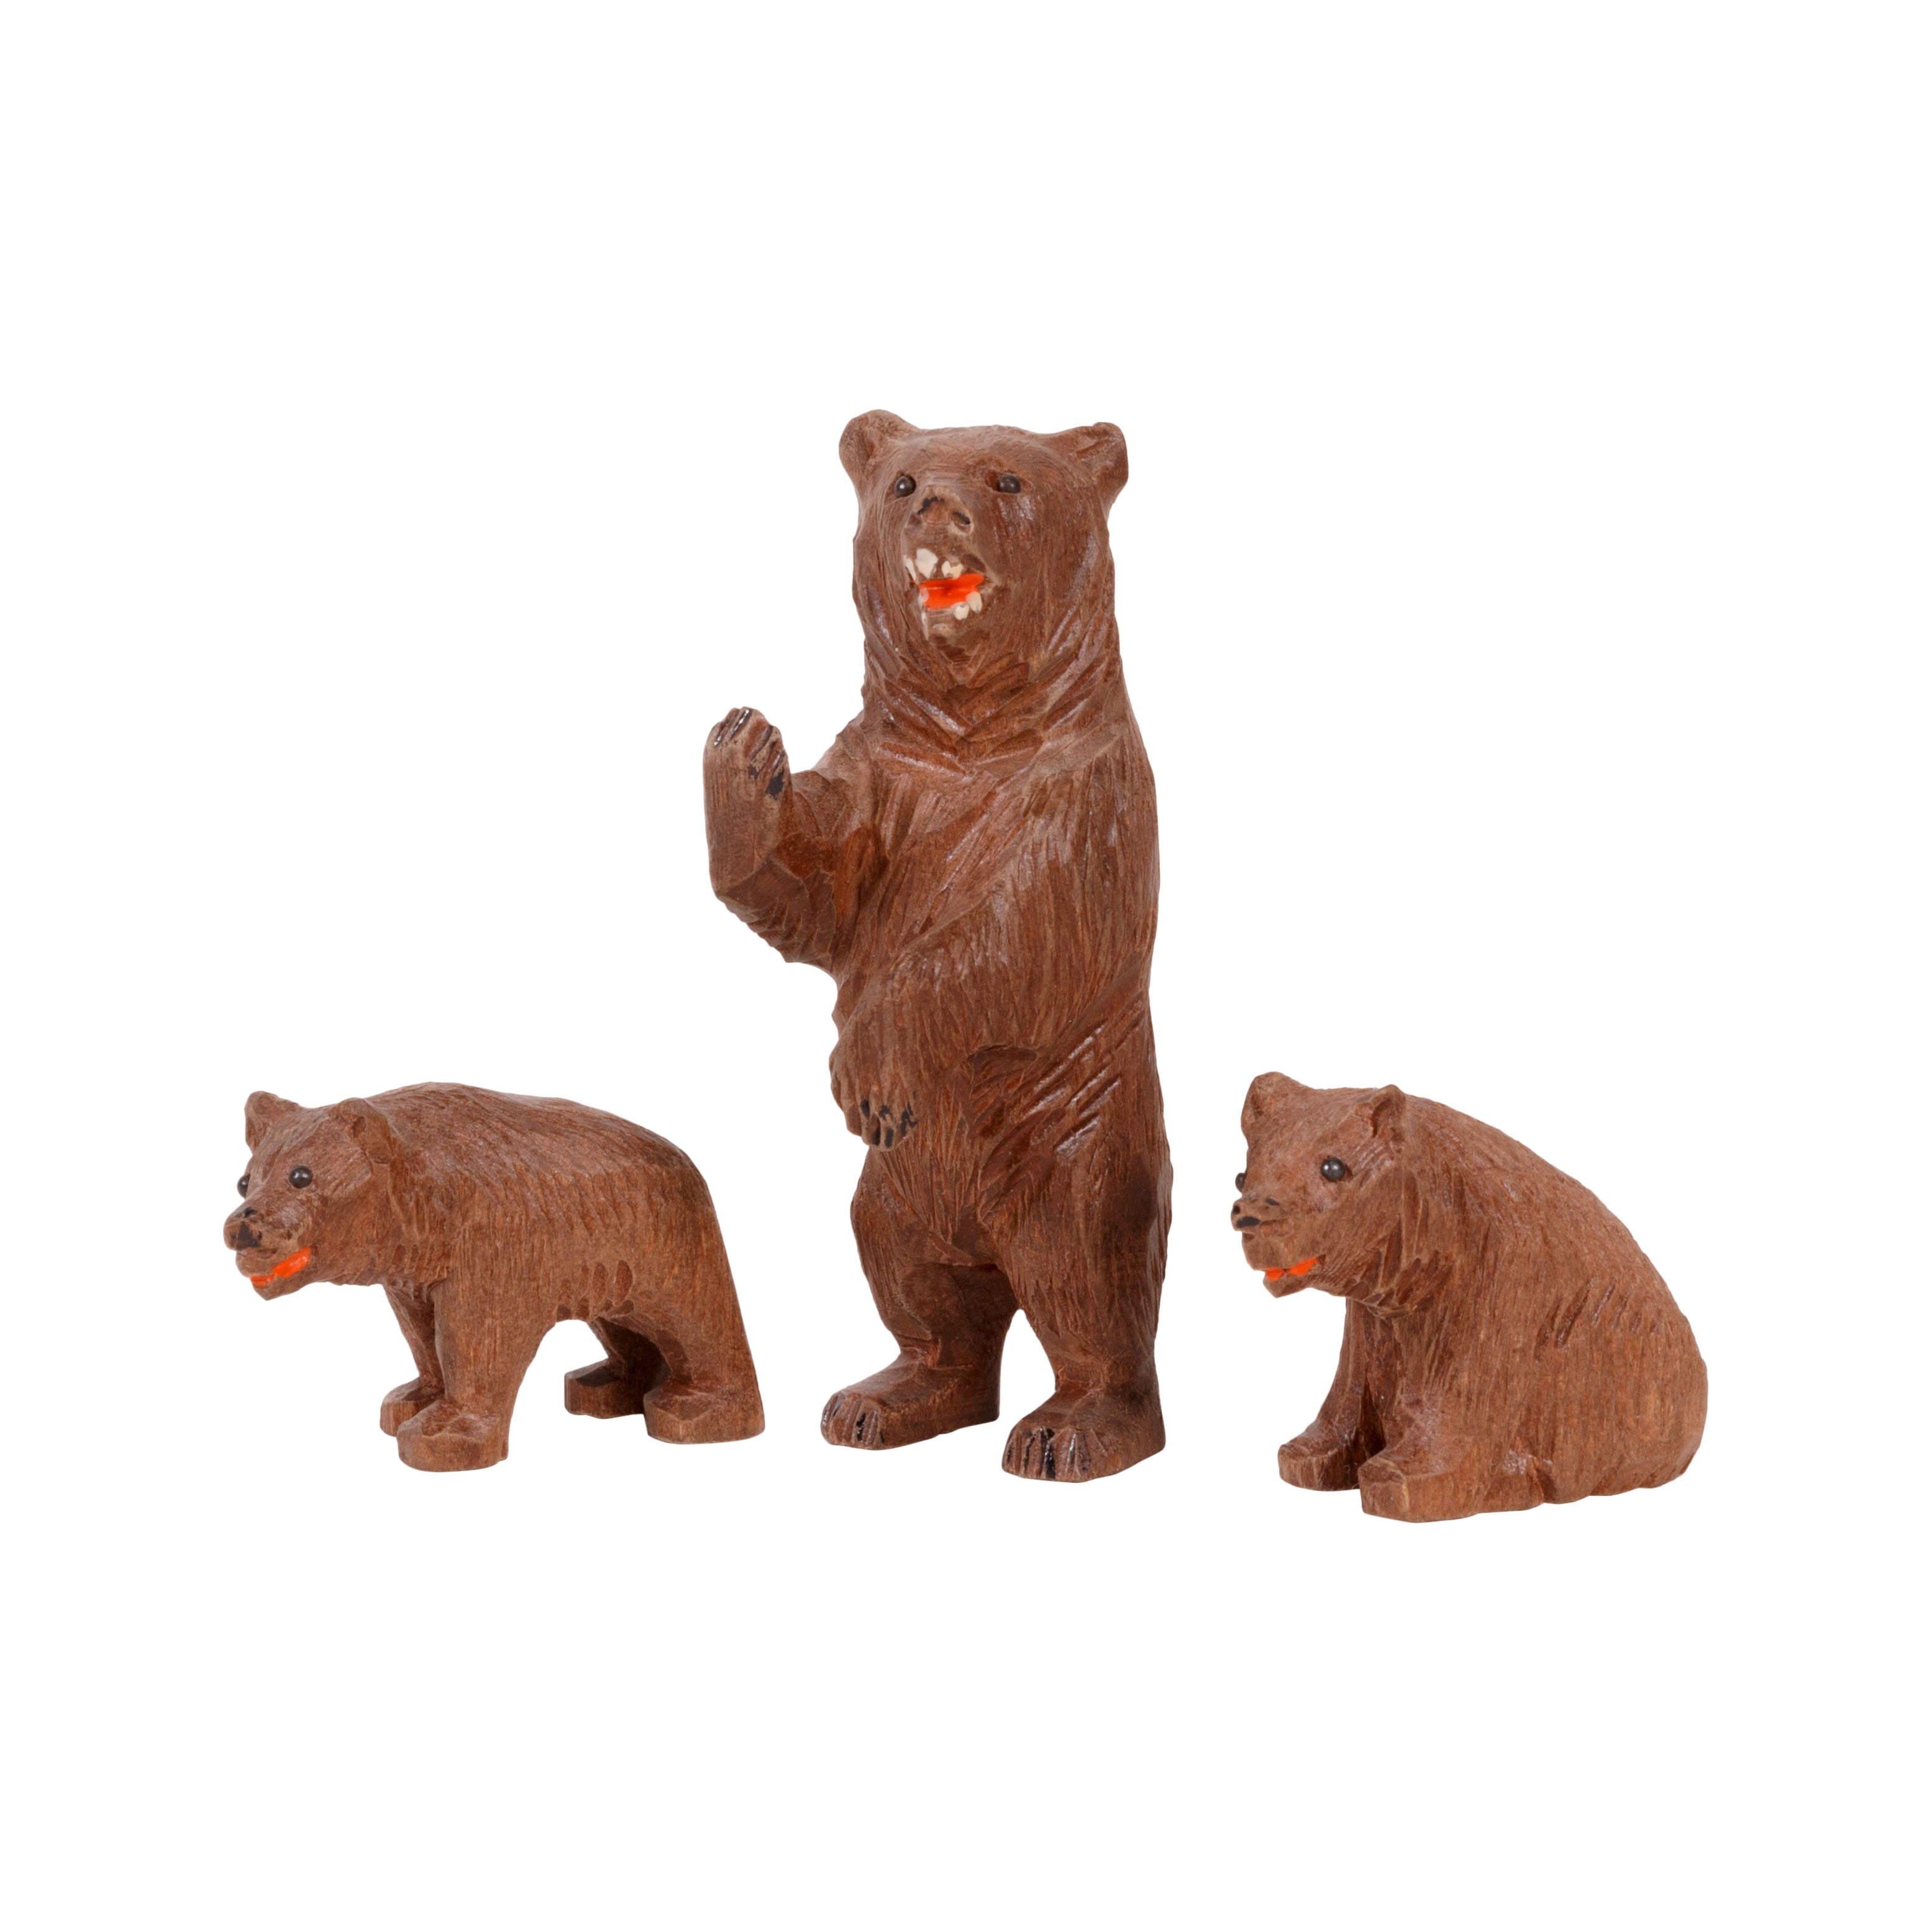 Ma and Two Cubs Bear Carving, Furnishings, Black Forest, Figure